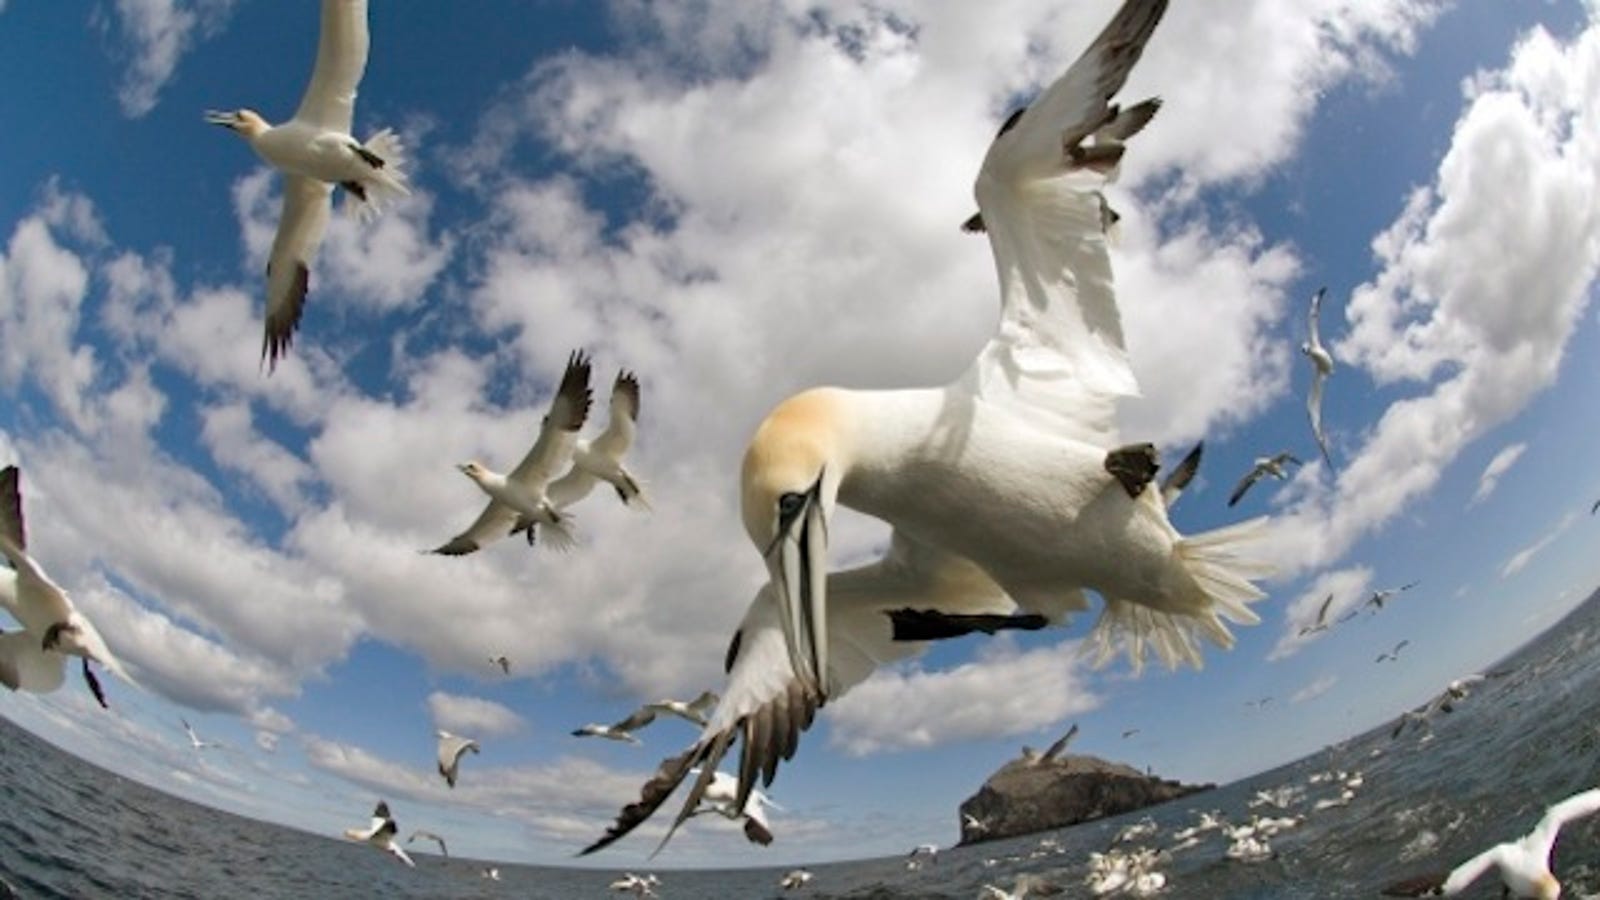 This Unbelievable Footage Literally Shows a Bird #39 s Eye View of the